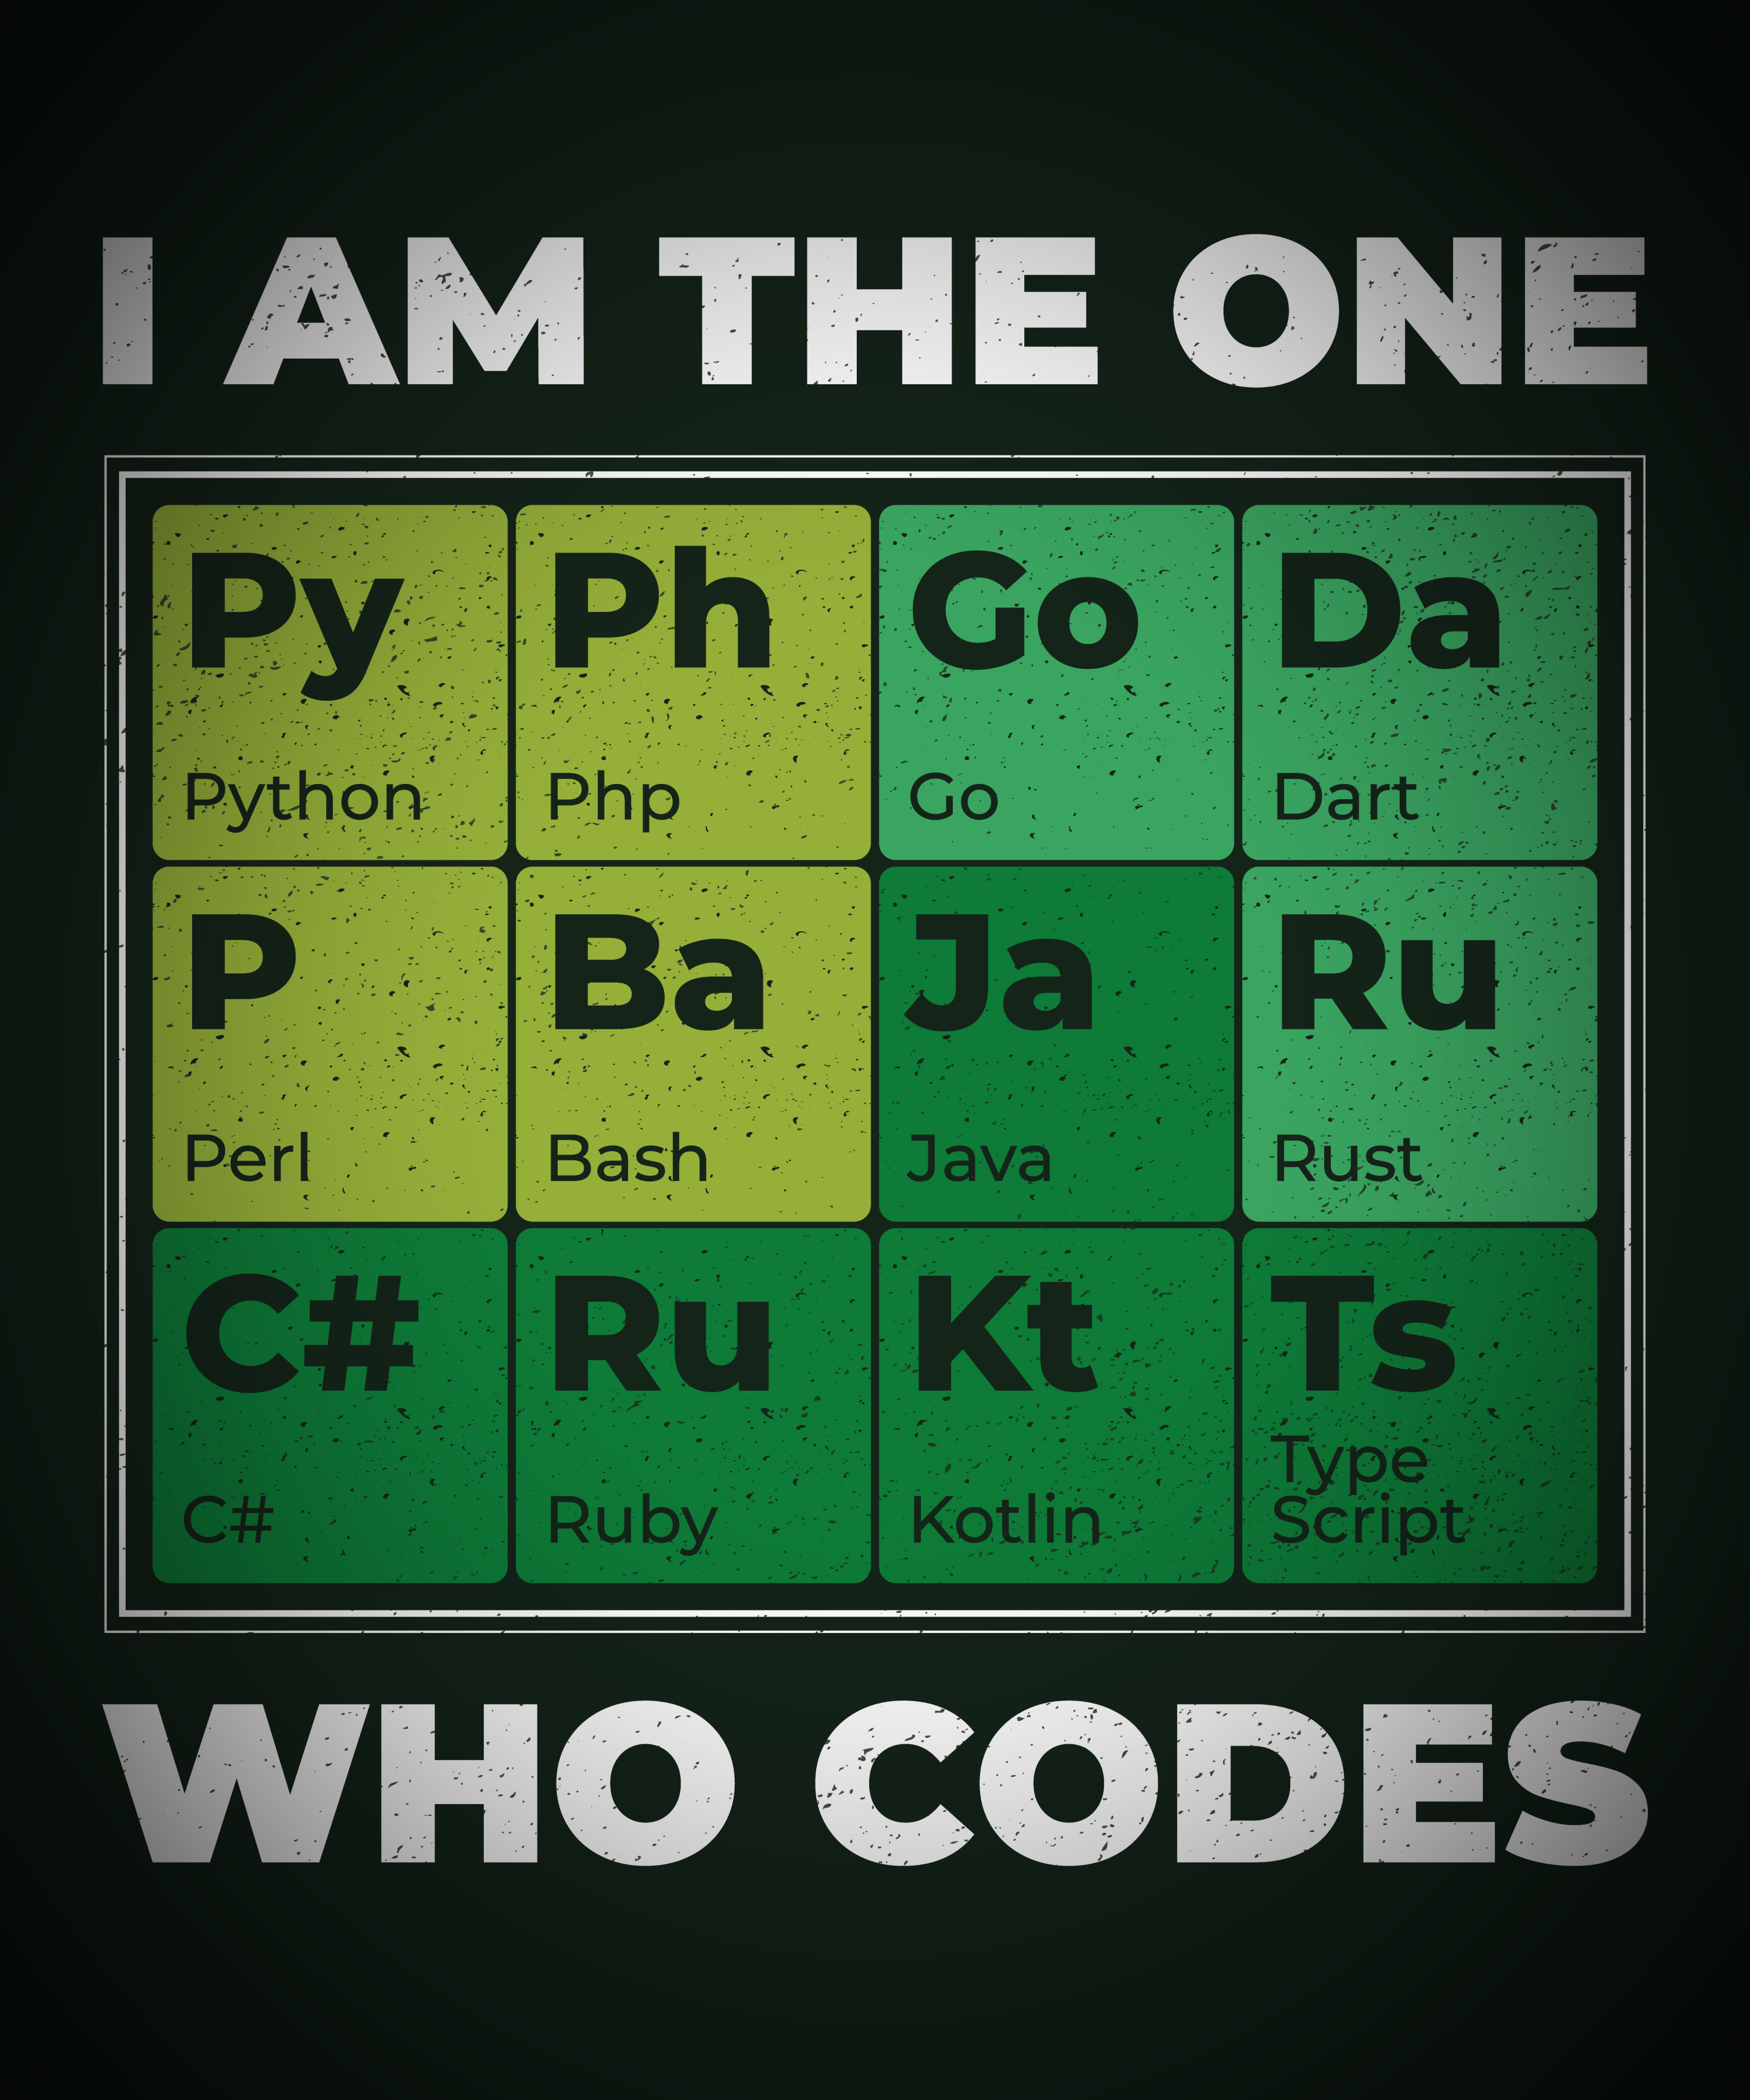 A I am the one who codes T-Shirt featuring a graphic with a periodic table theme displaying programming languages, captioned with "i am the one who codes".